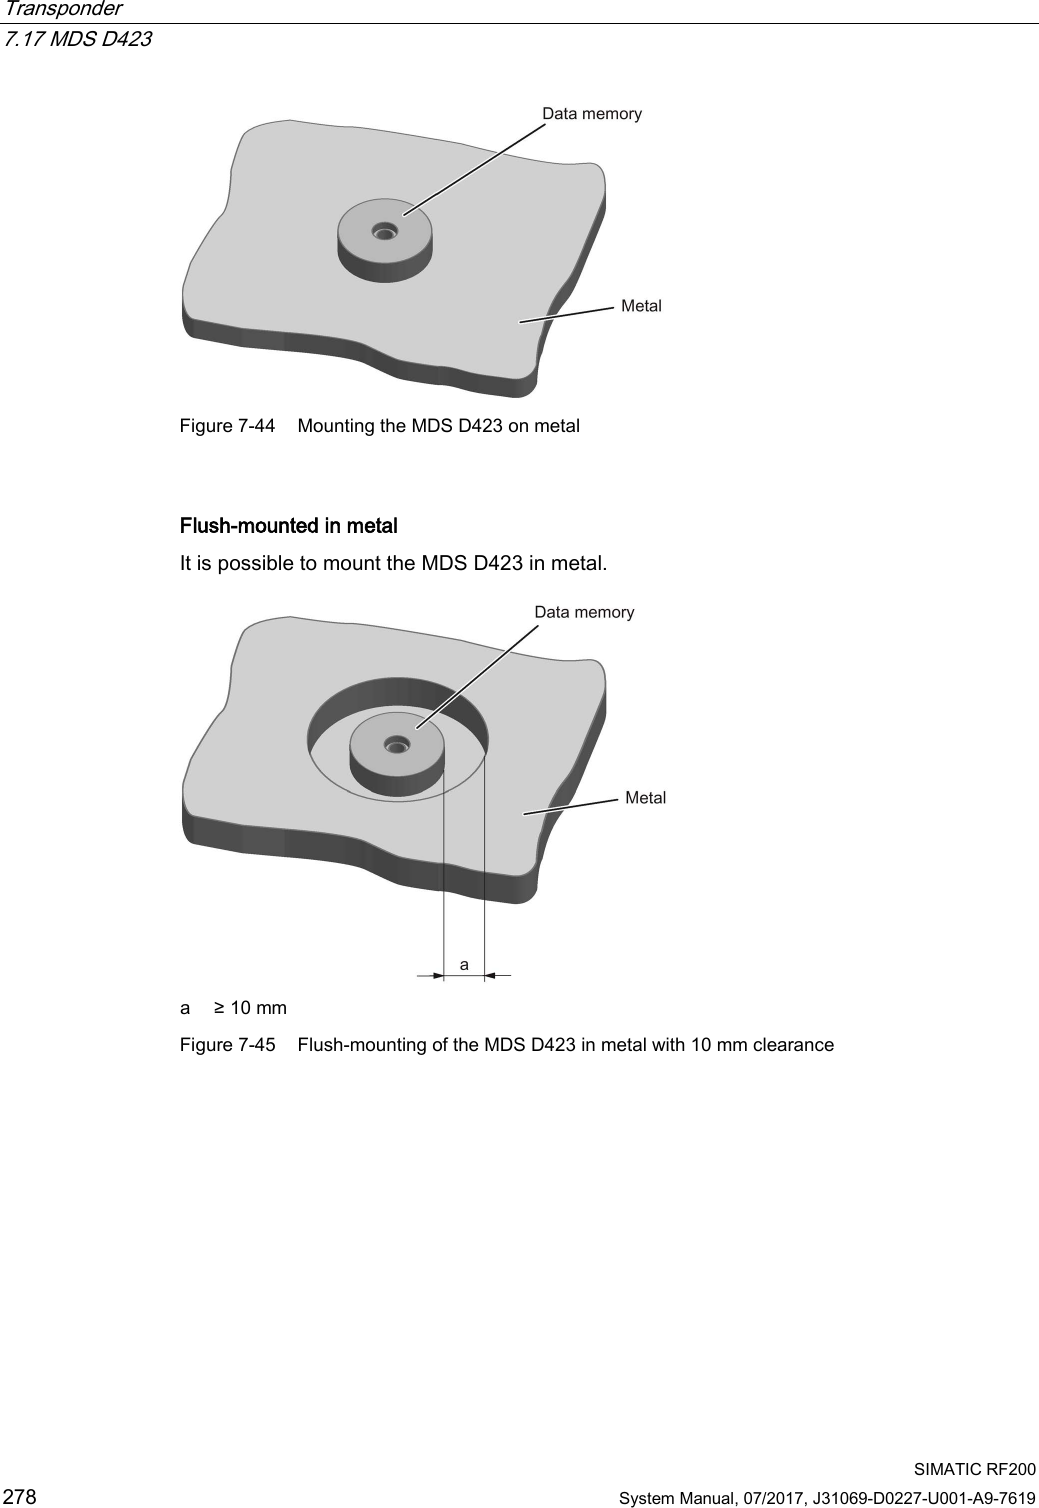 Transponder   7.17 MDS D423  SIMATIC RF200 278 System Manual, 07/2017, J31069-D0227-U001-A9-7619  Figure 7-44 Mounting the MDS D423 on metal  Flush-mounted in metal It is possible to mount the MDS D423 in metal.  a ≥ 10 mm Figure 7-45 Flush-mounting of the MDS D423 in metal with 10 mm clearance  